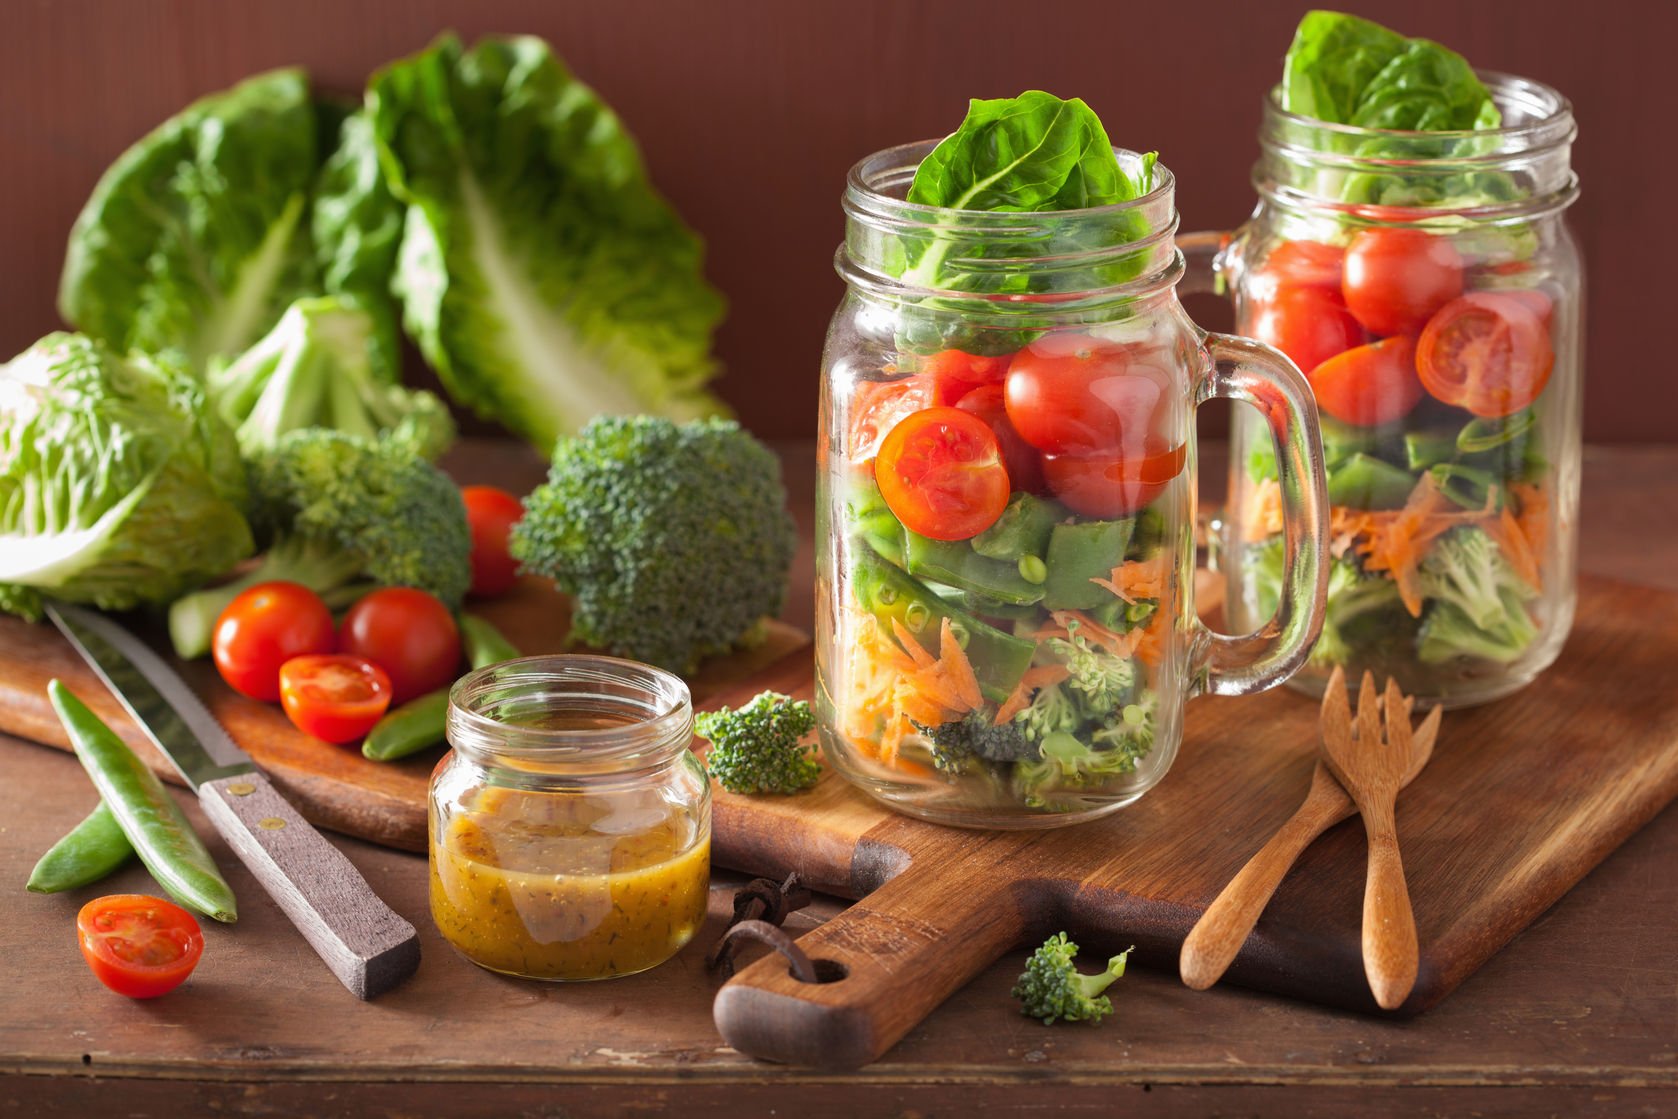 How To Build A Mason Jar Salad (And What To Put In It!)